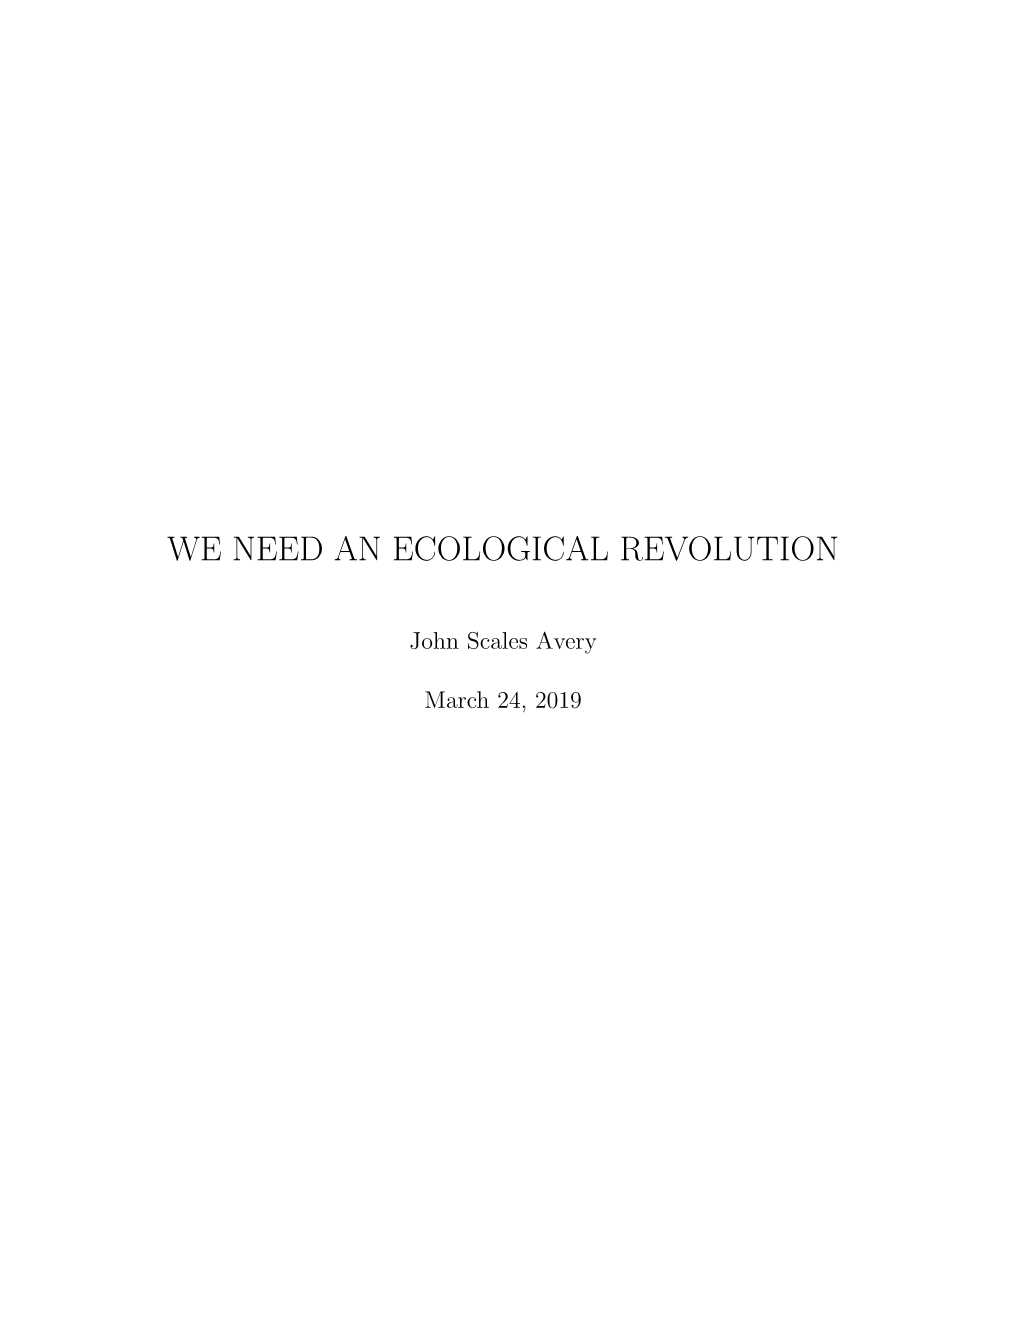 We Need an Ecological Revolution